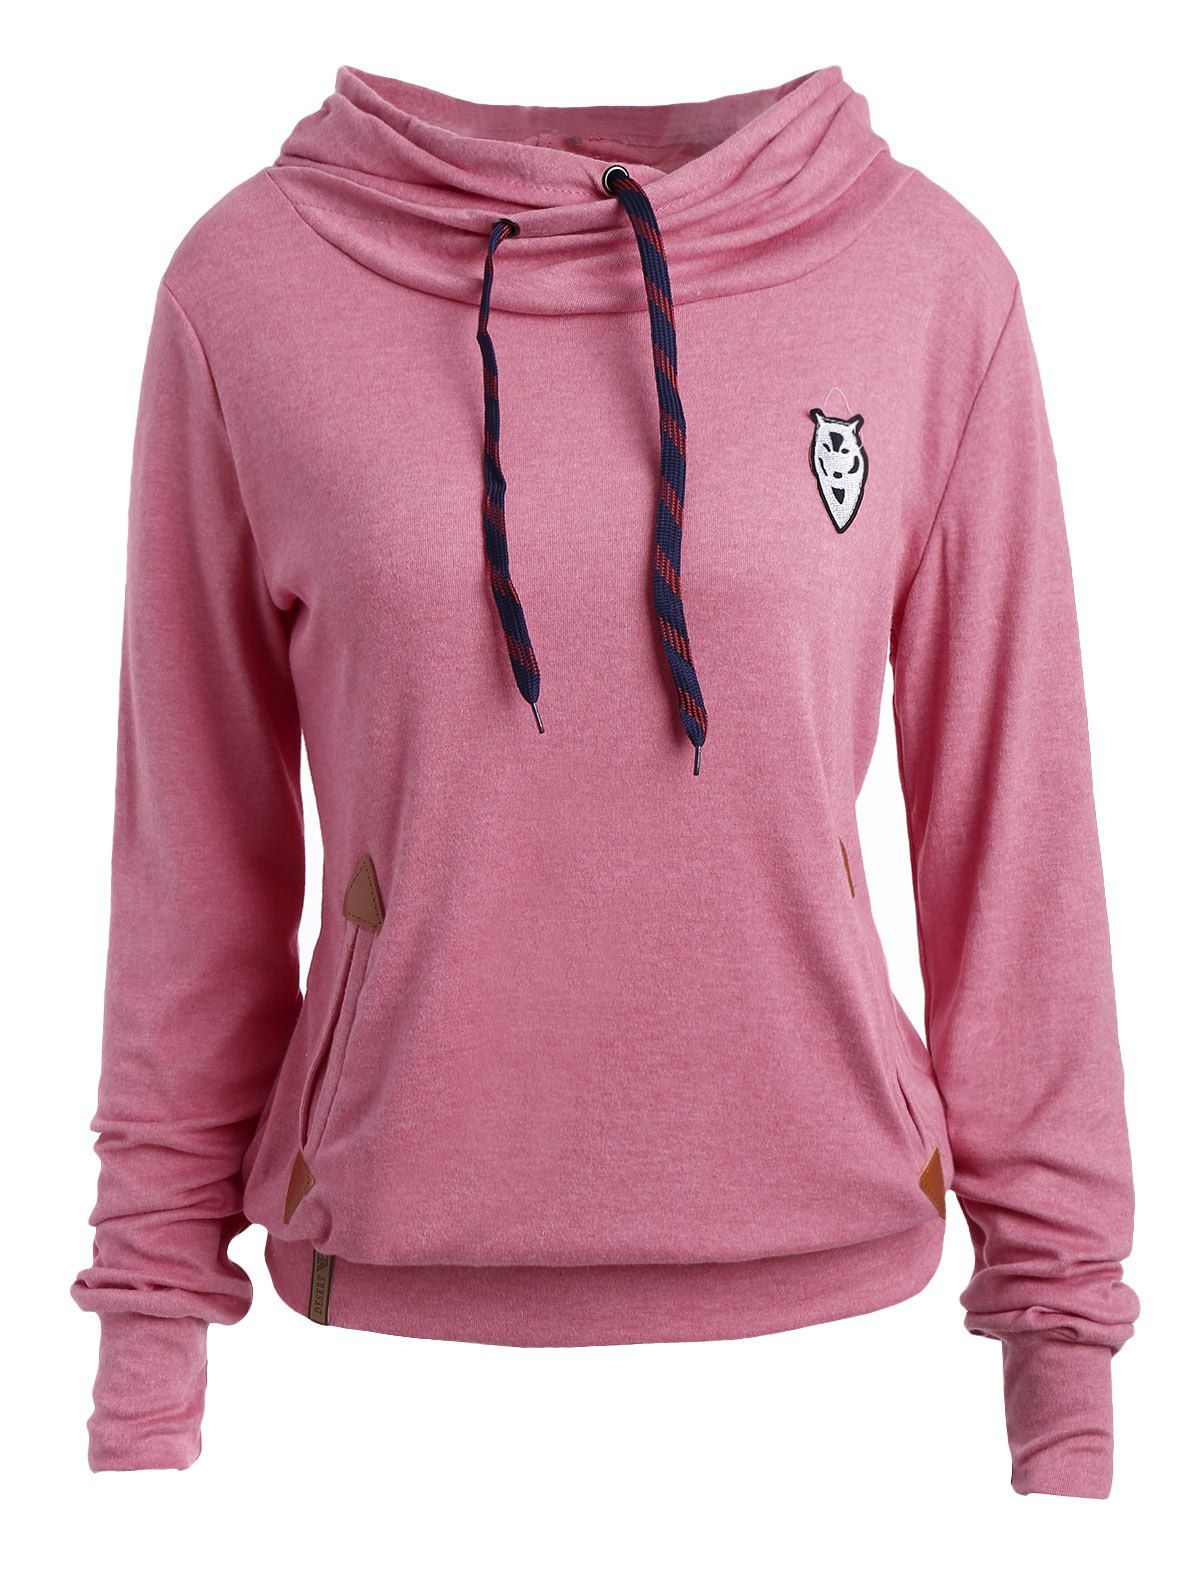 Pink L Drawstring Pocket Design Embroidered Hoodie | www.bagssaleusa.com/product-category/classic-bags/